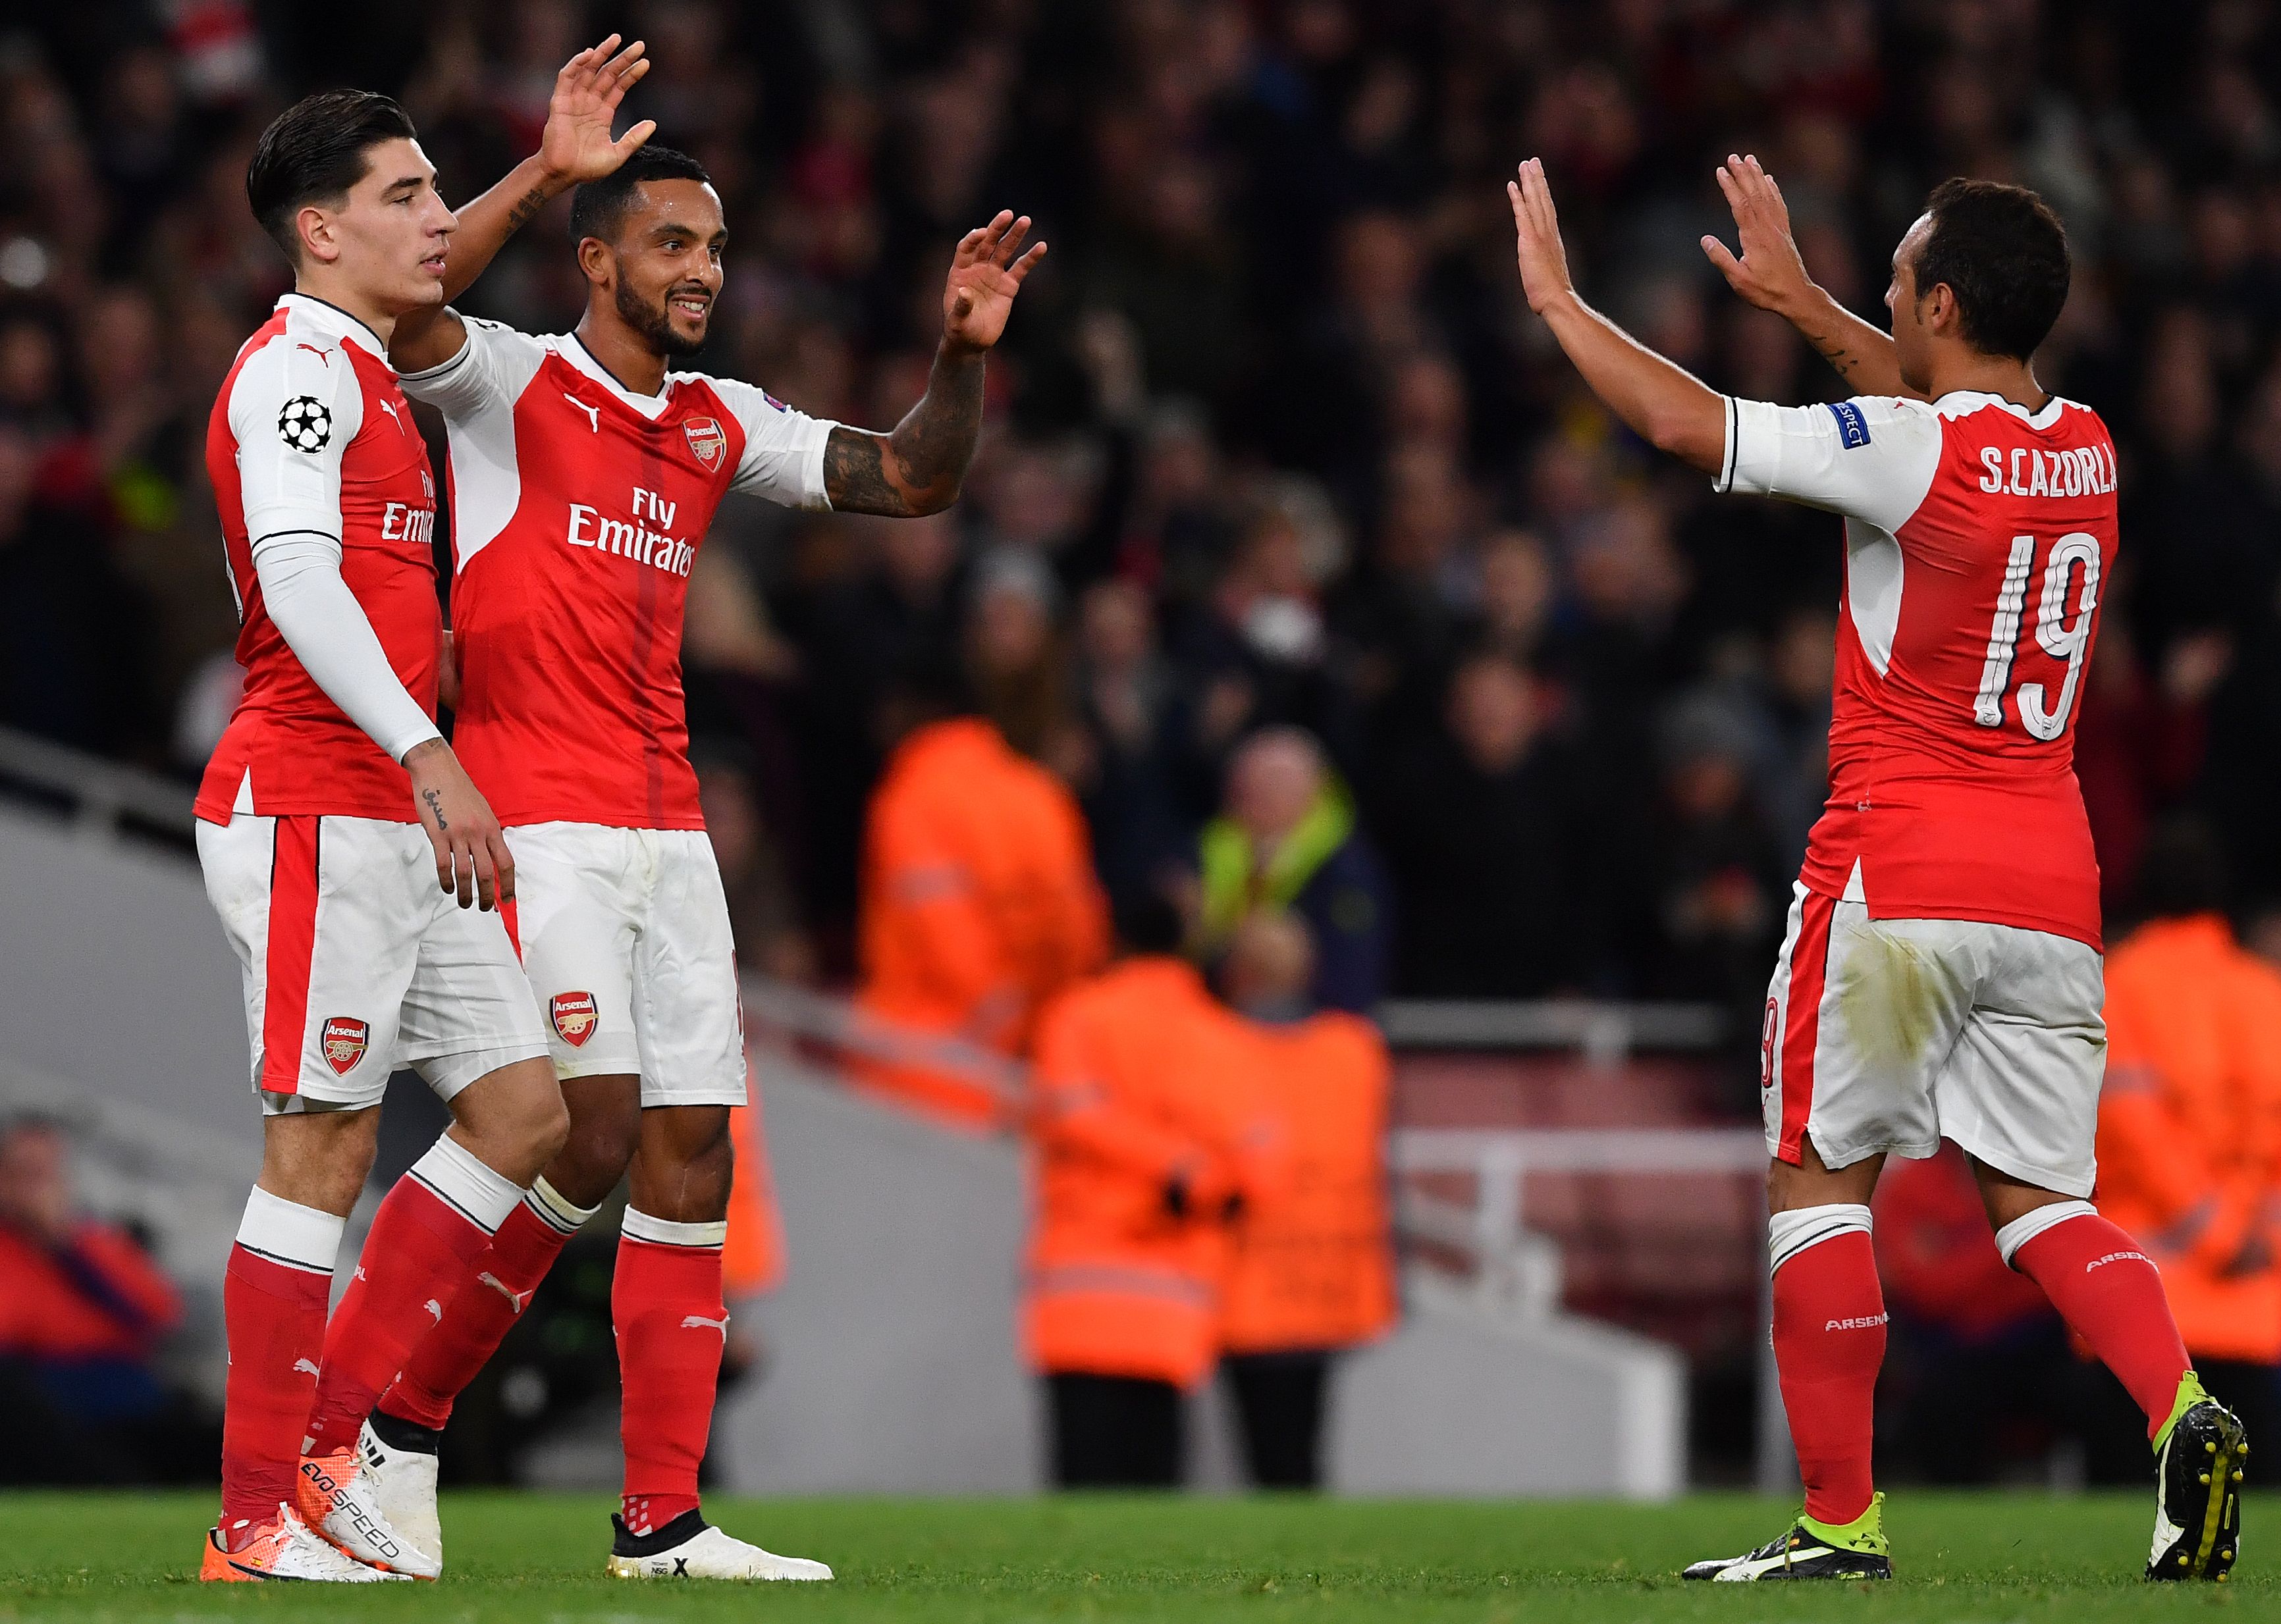 Arsenal should run out 2-0 winners (Photo credit BEN STANSALL/AFP/Getty Images)